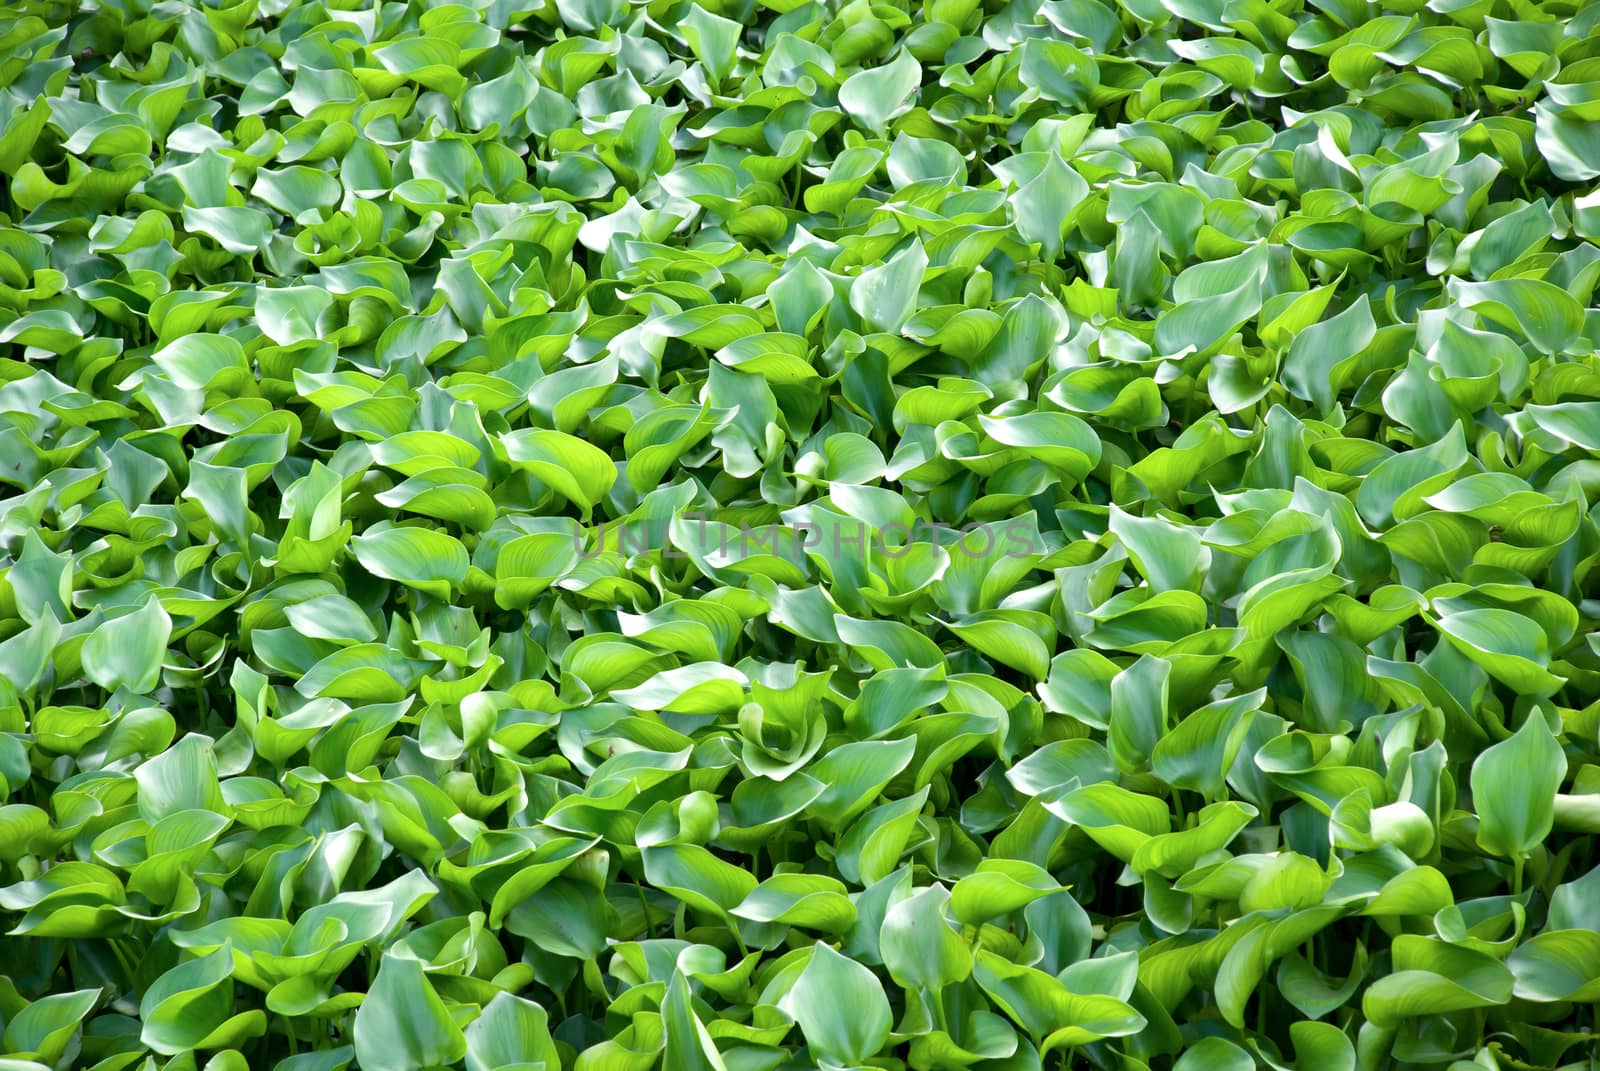 Water Hyacinth cover a pond.